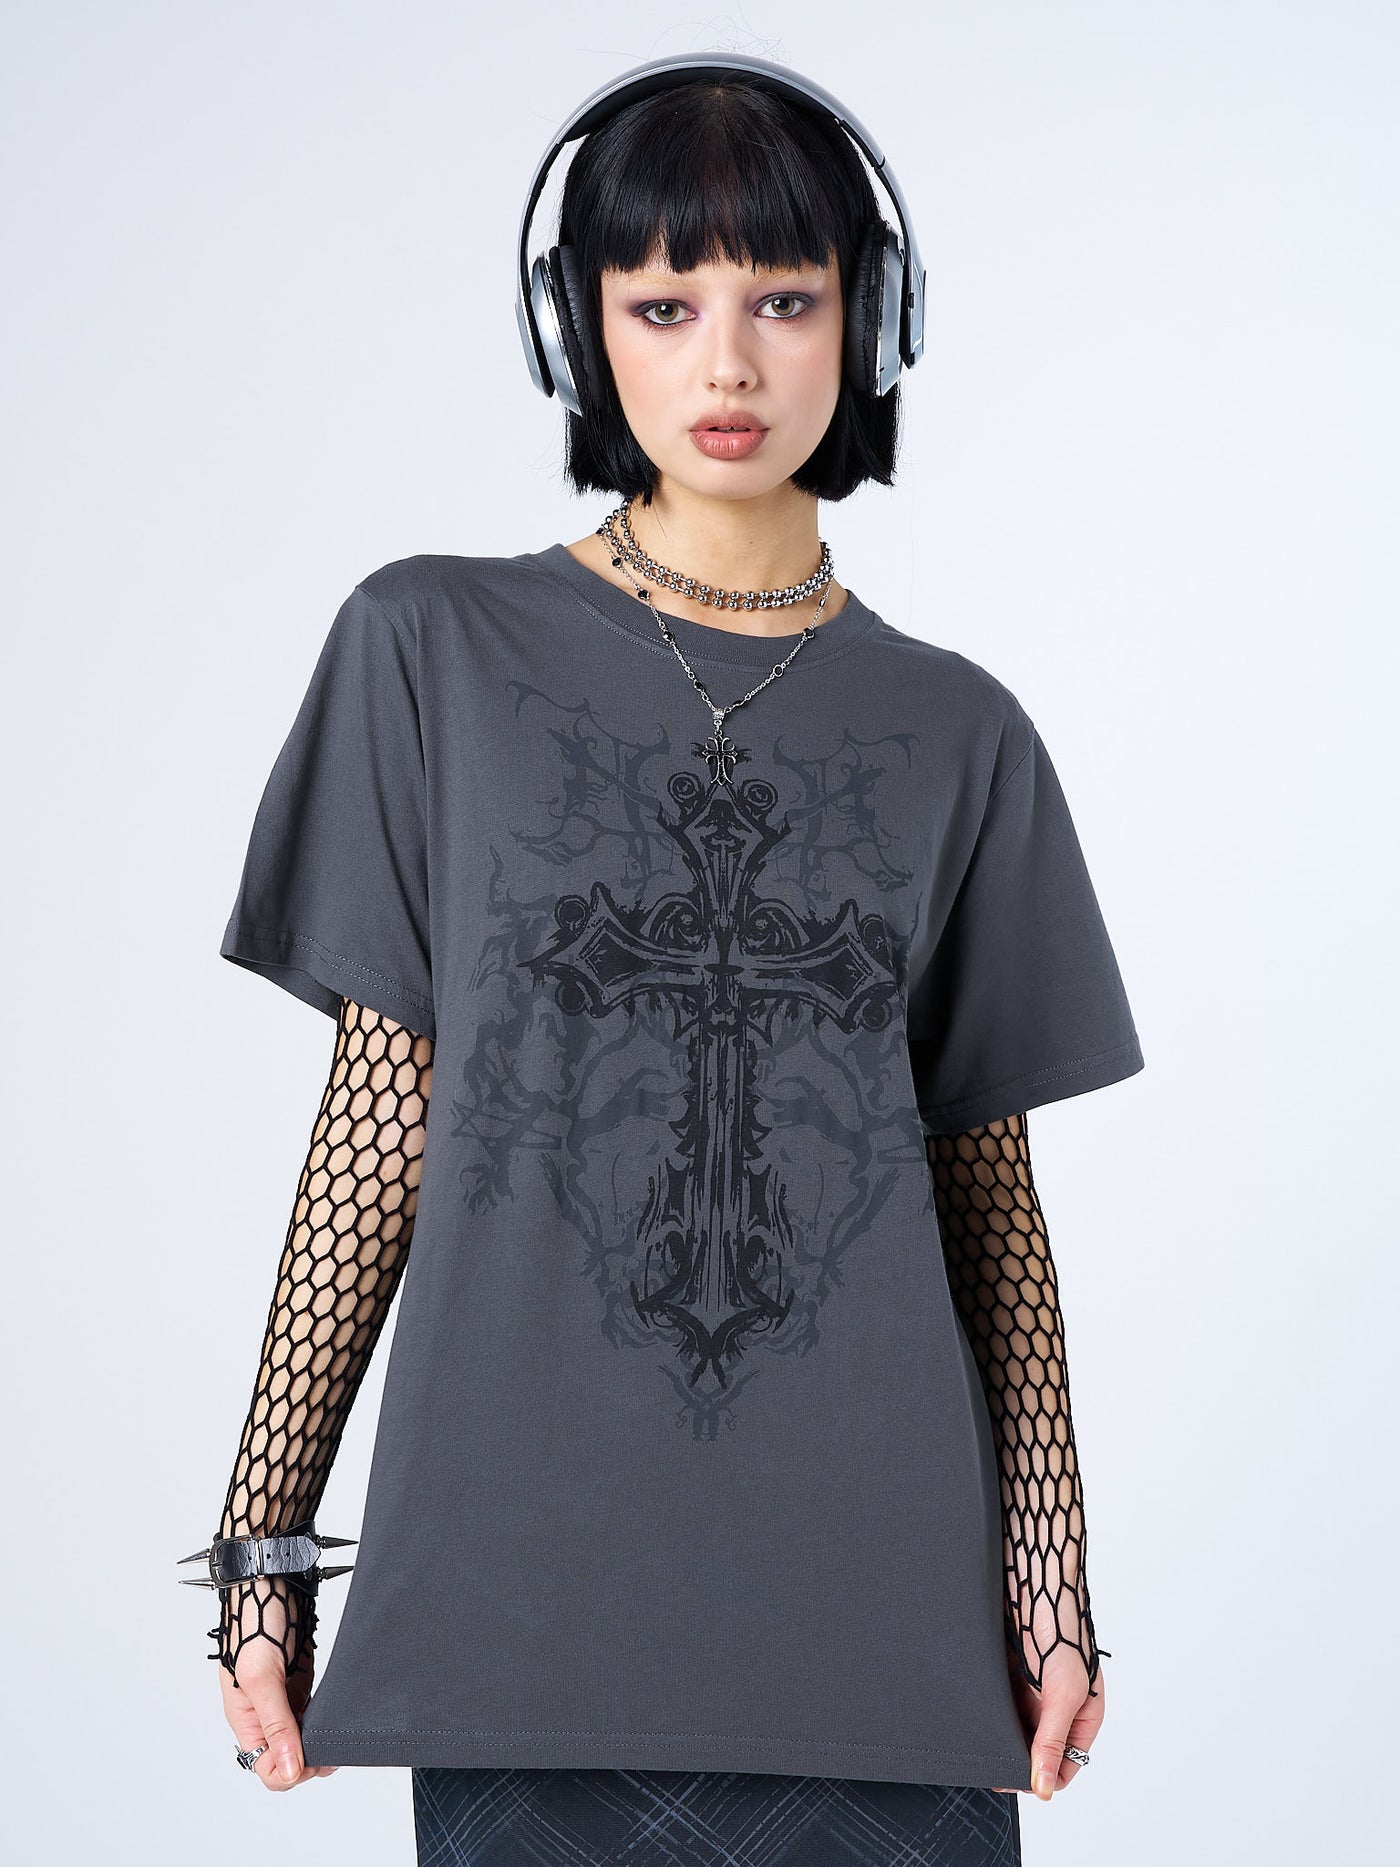 Cryptic Cross Graphic Grey T-shirt